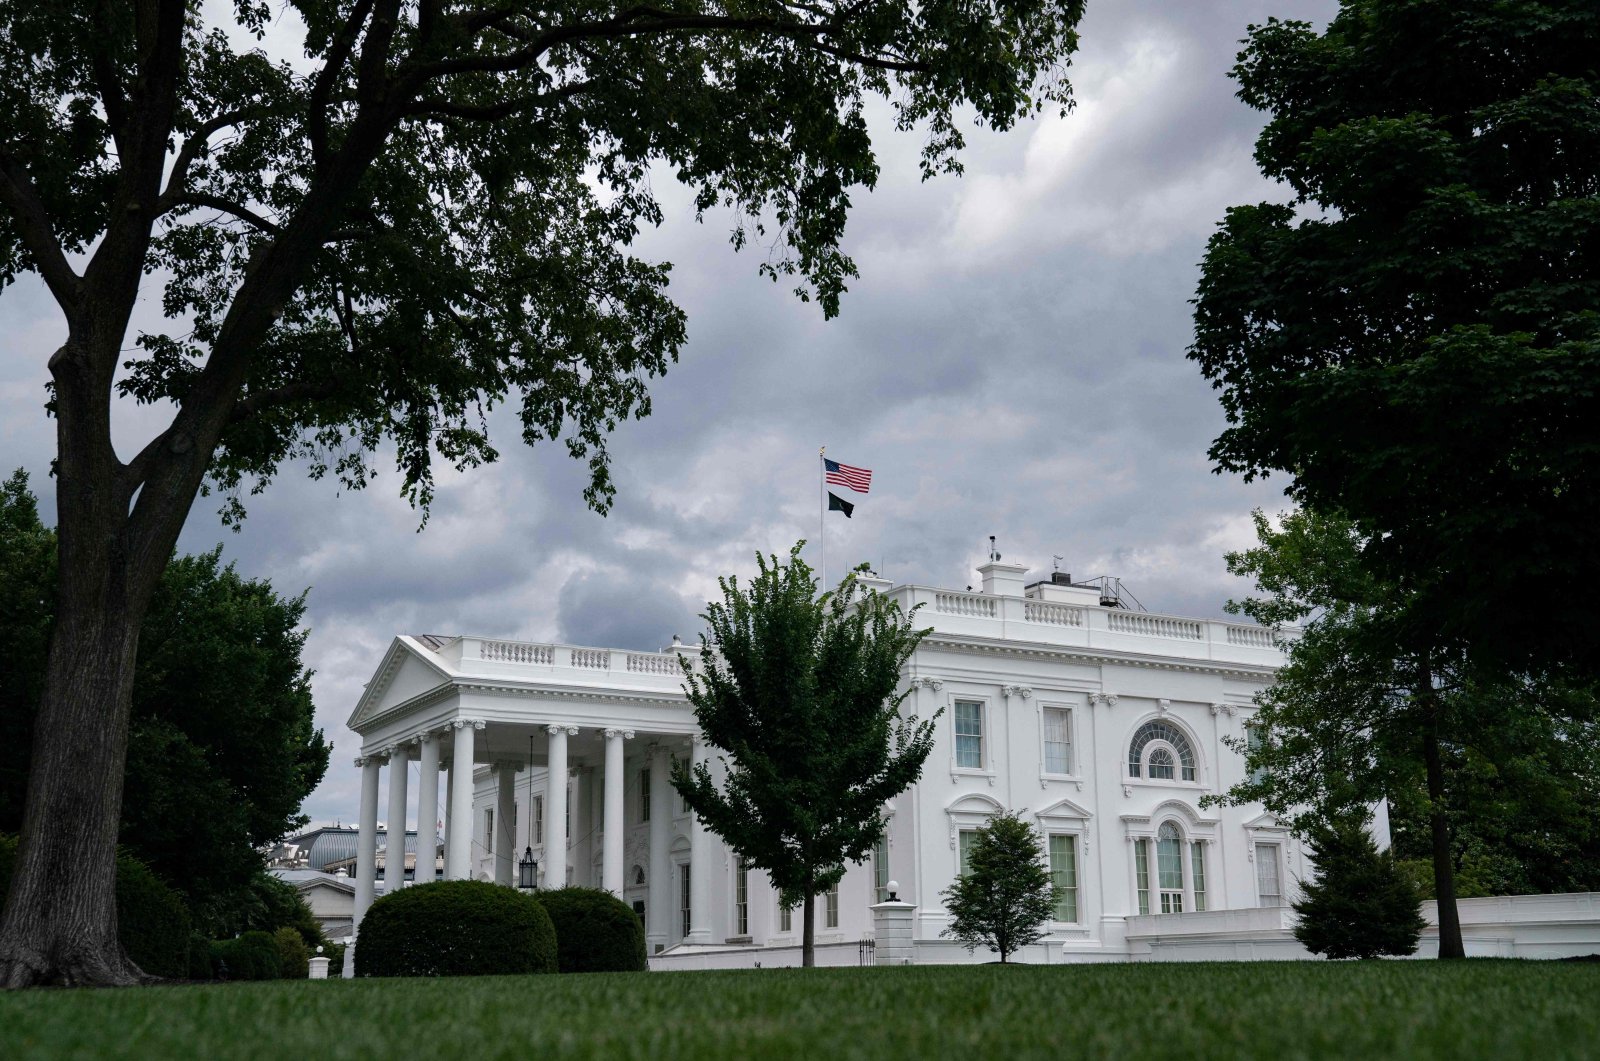 The White House is seen in Washington, D.C., U.S., July 3, 2021. (AFP Photo)